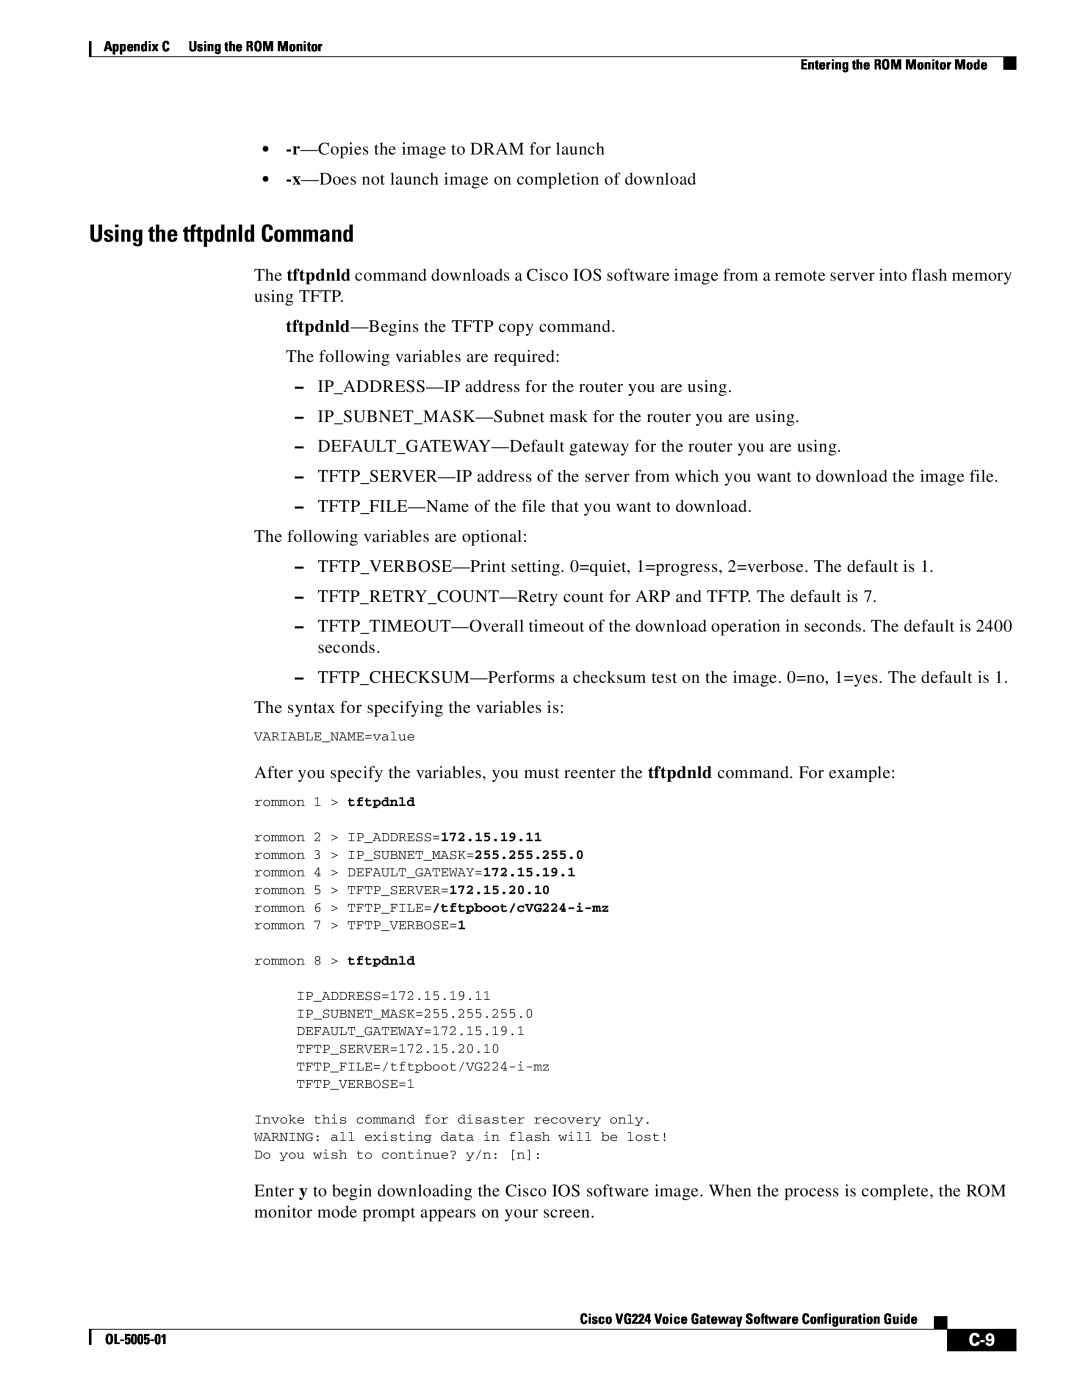 Cisco Systems VG224 manual Using the tftpdnld Command 